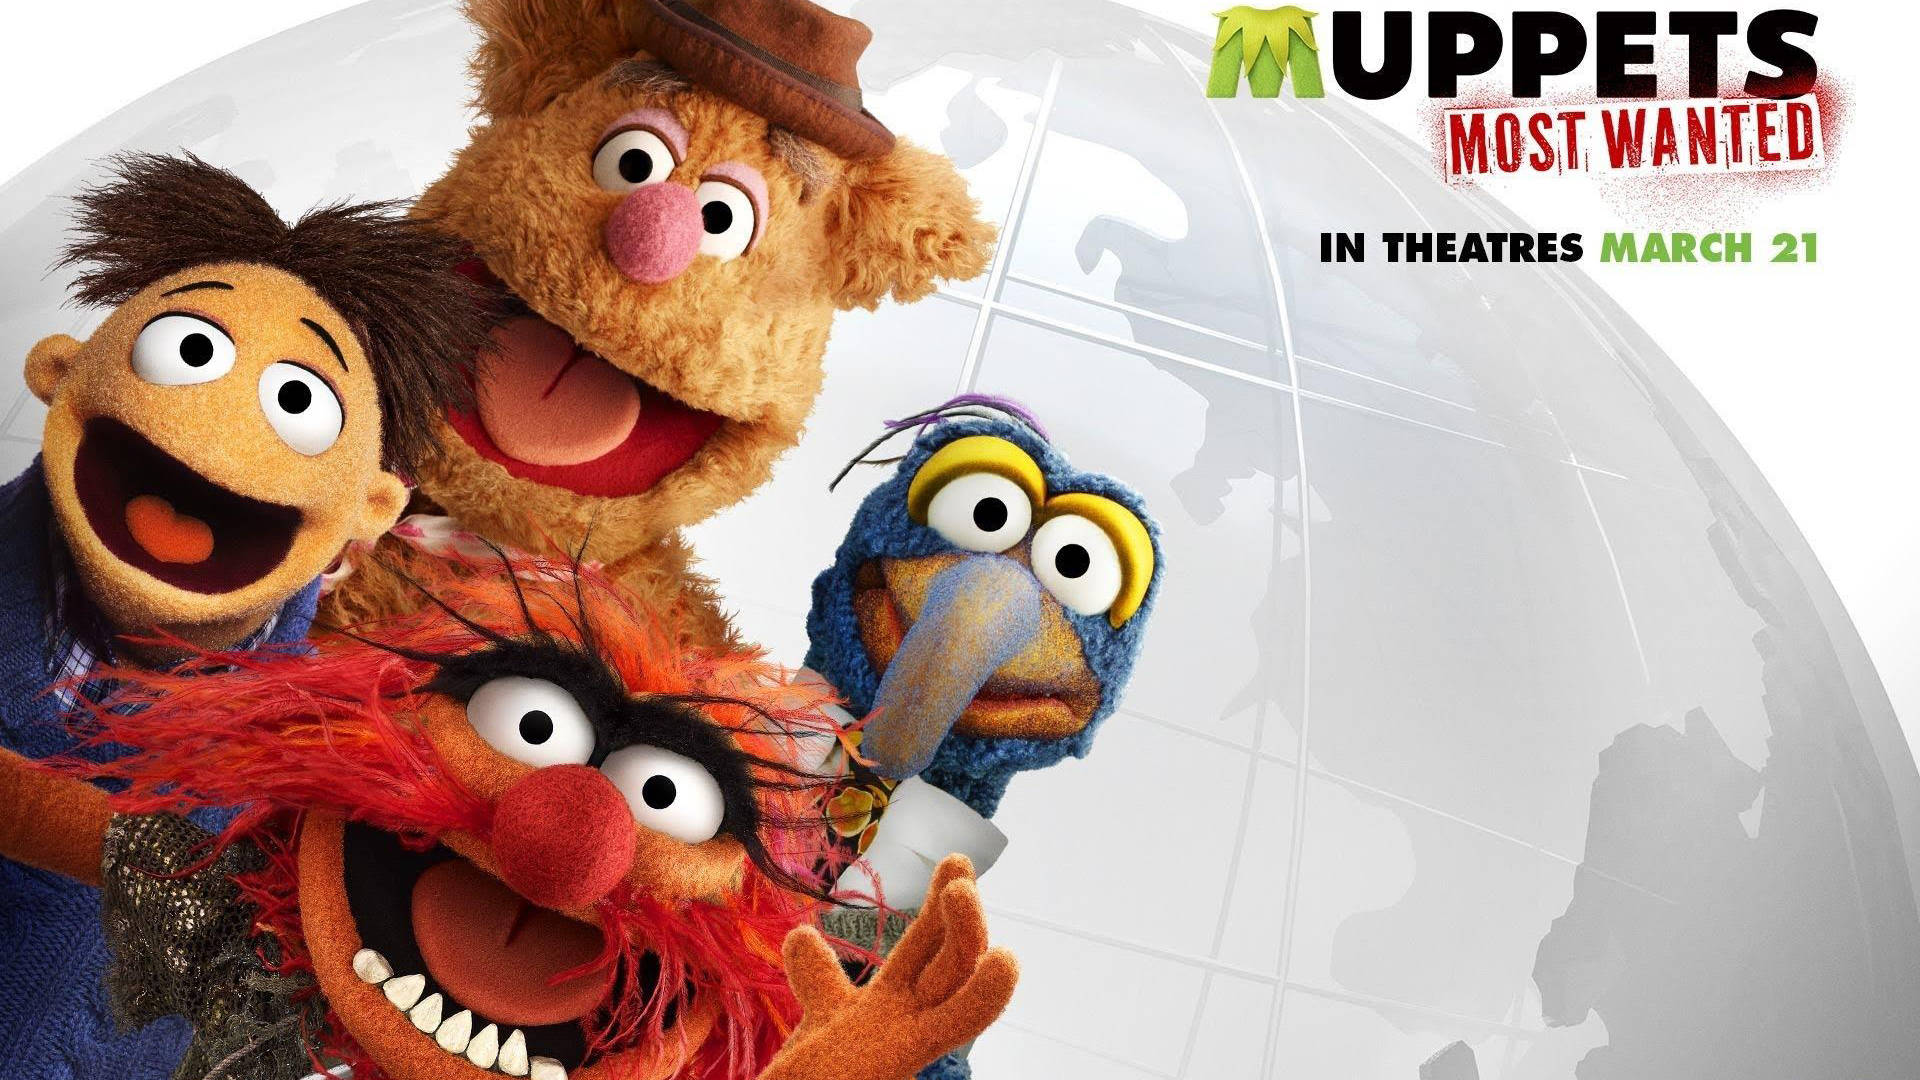 Muppets Most Wanted Walter, Fozzie, Animal, Gonzo Background